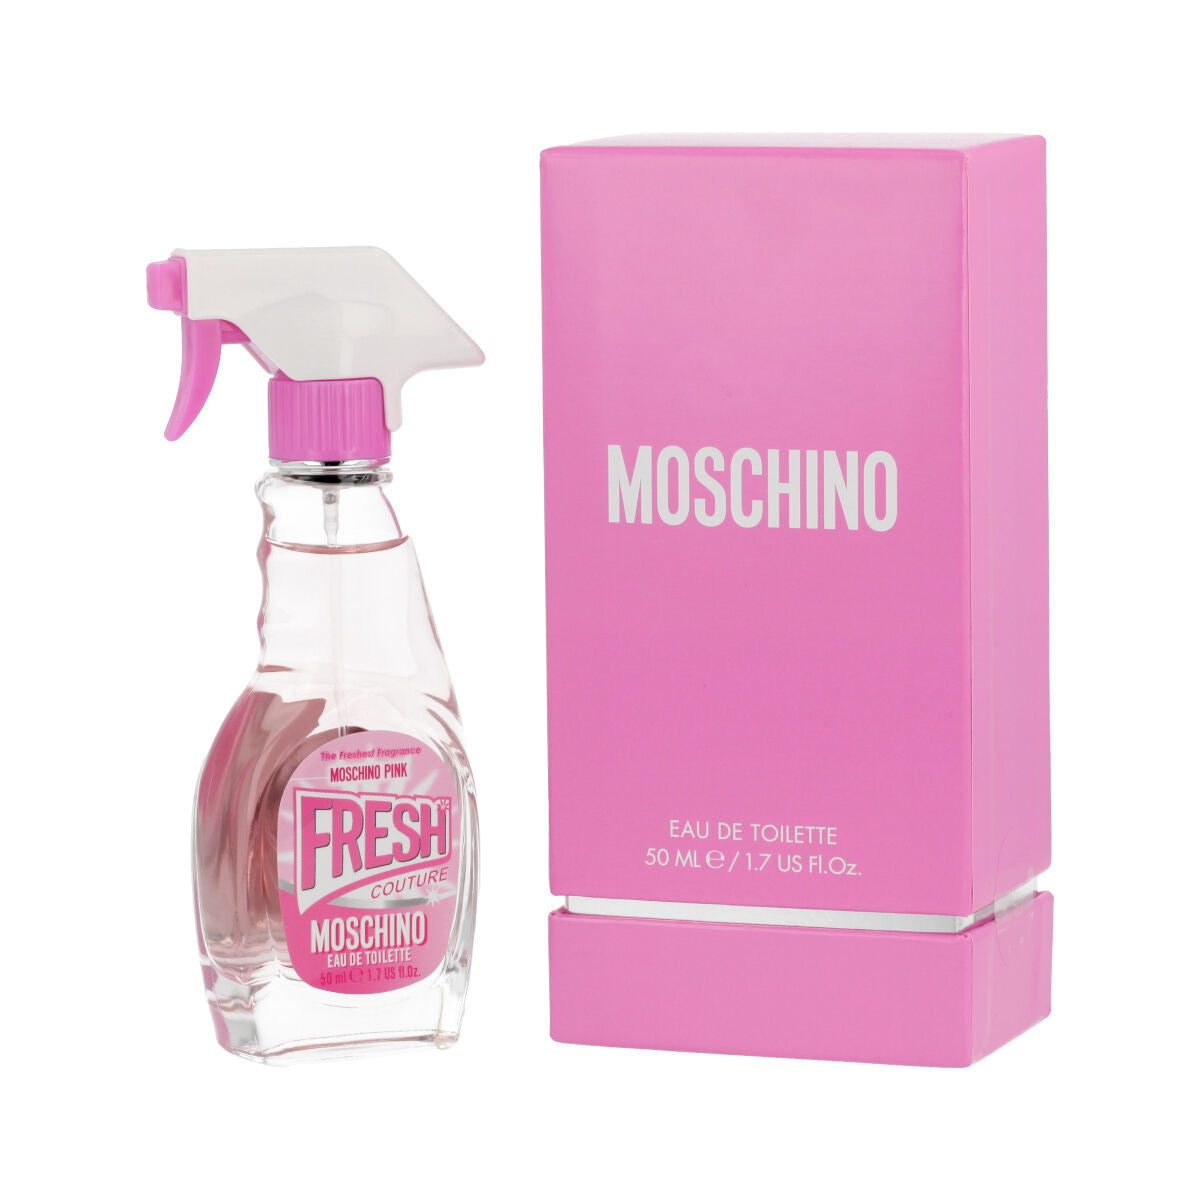 Kvinnors parfym moschino edt rosa färsk couture 50 ml